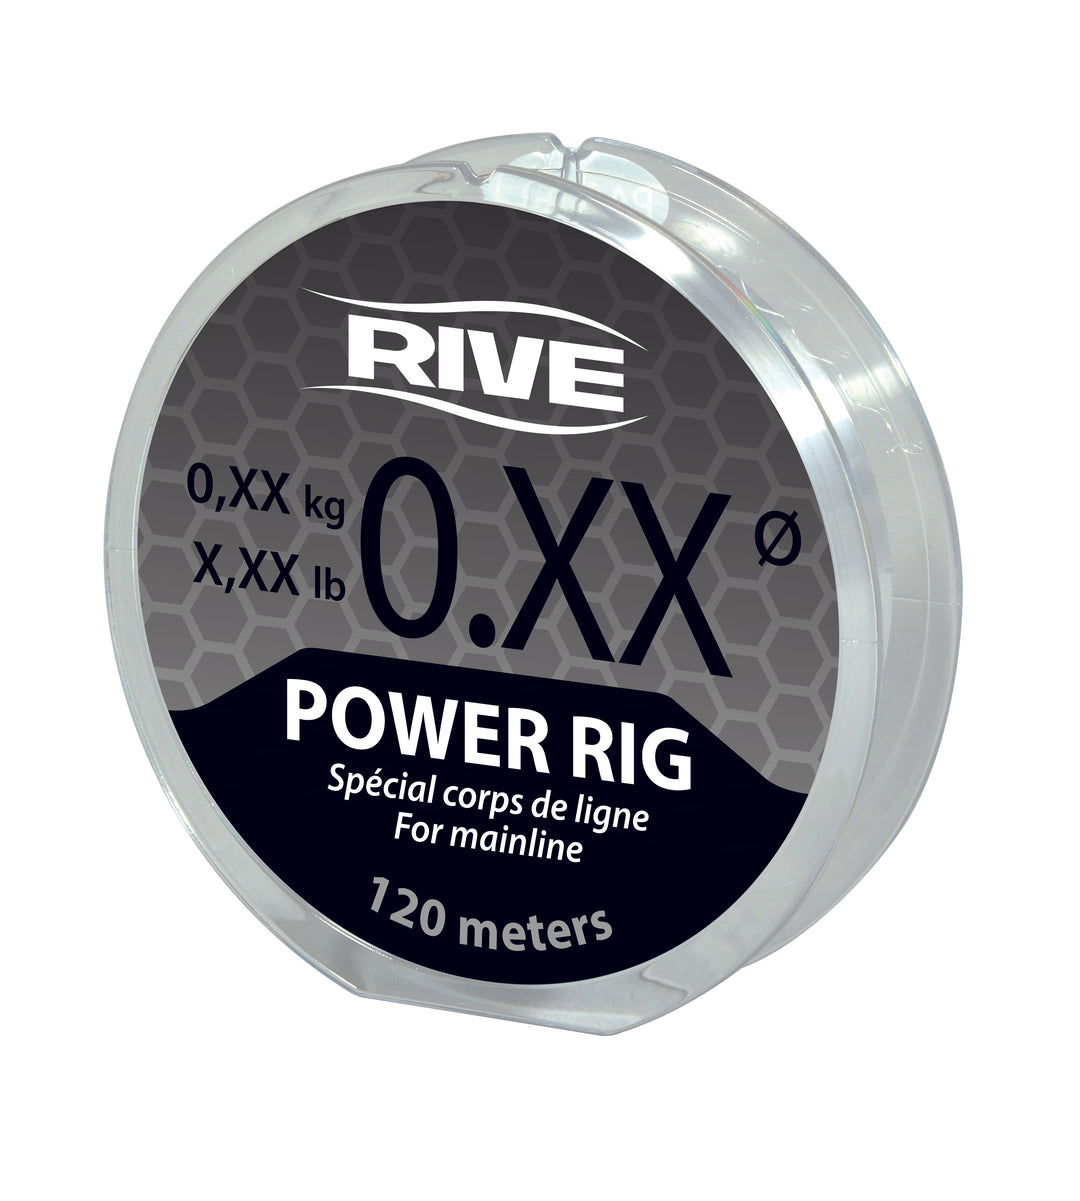 Power Rig Rive